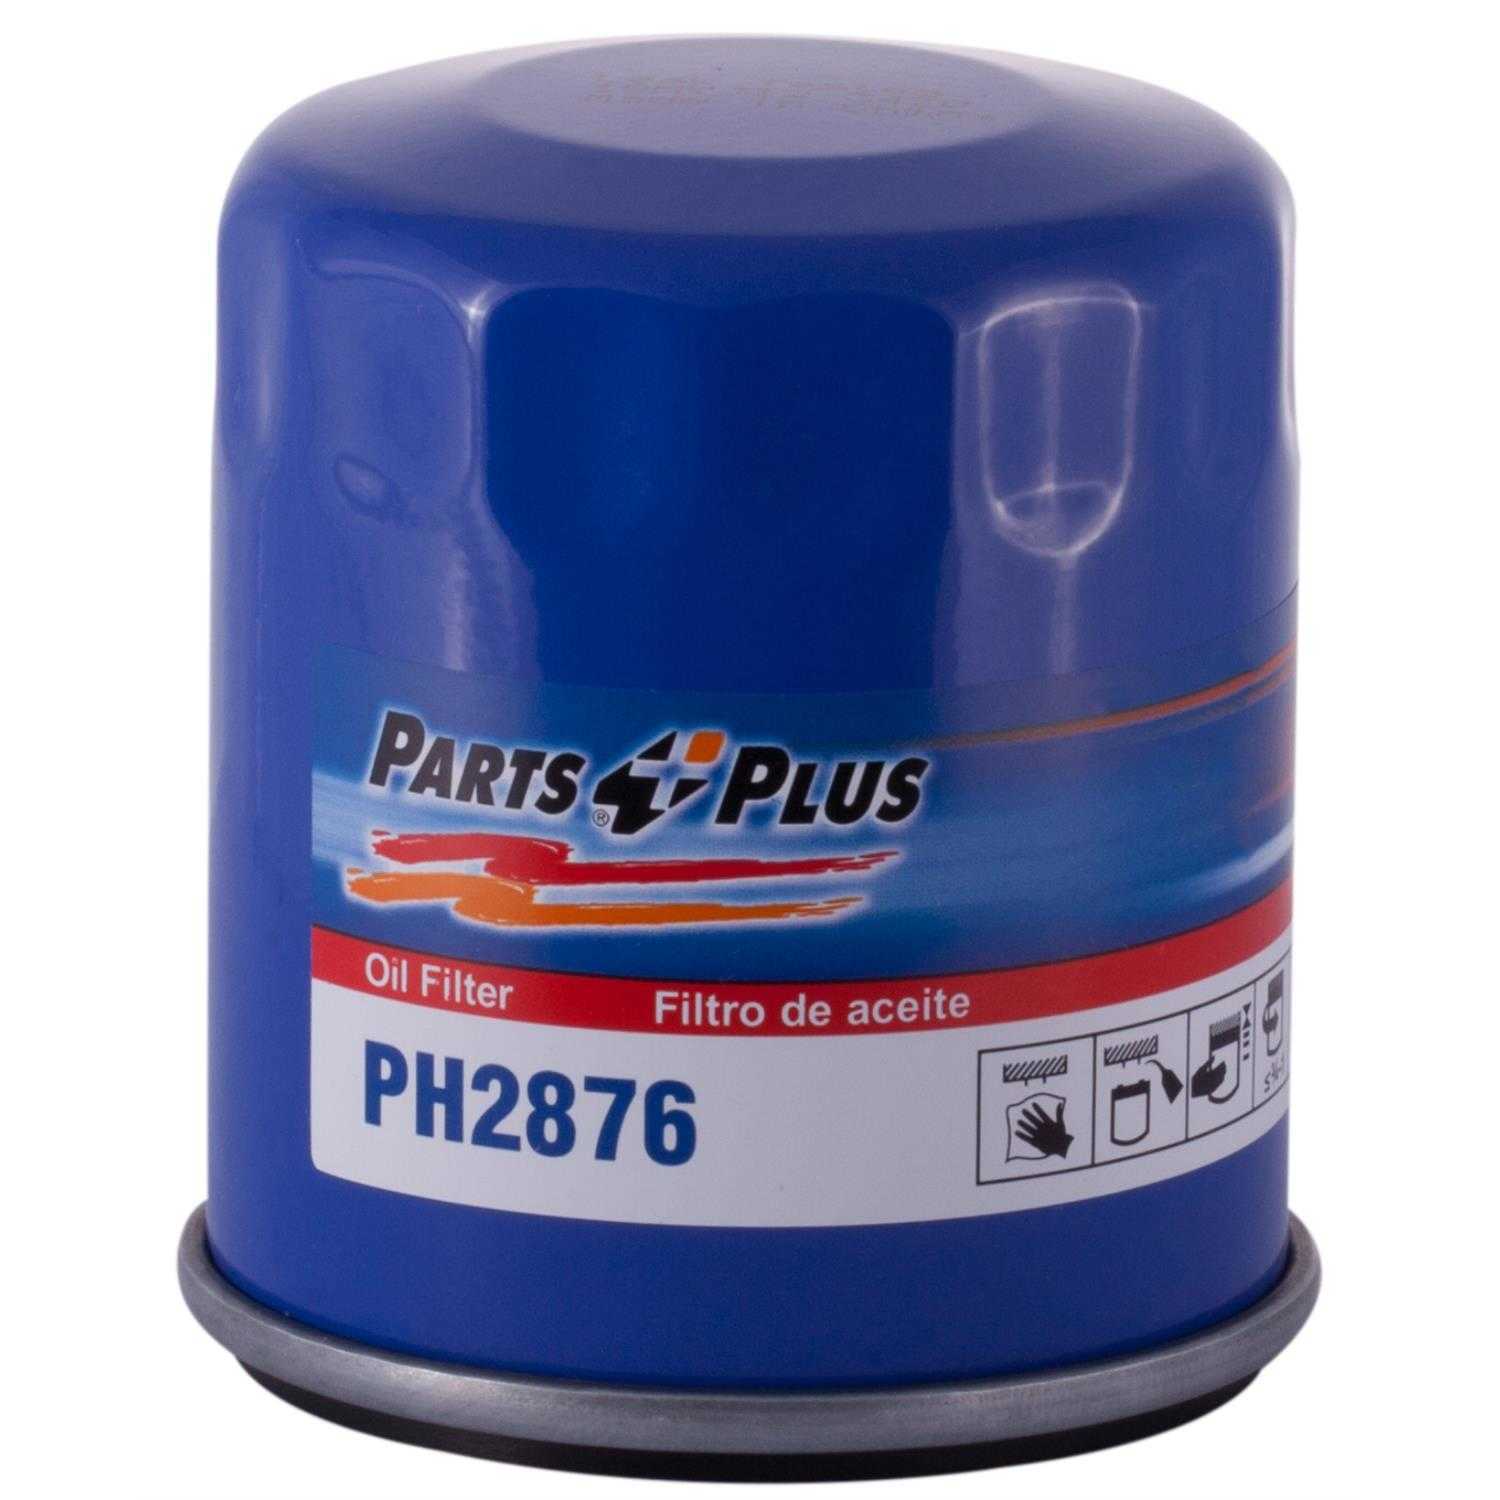 PARTS PLUS FILTERS BY PREMIUM GUARD - Standard Life Oil Filter - PLF PH2876